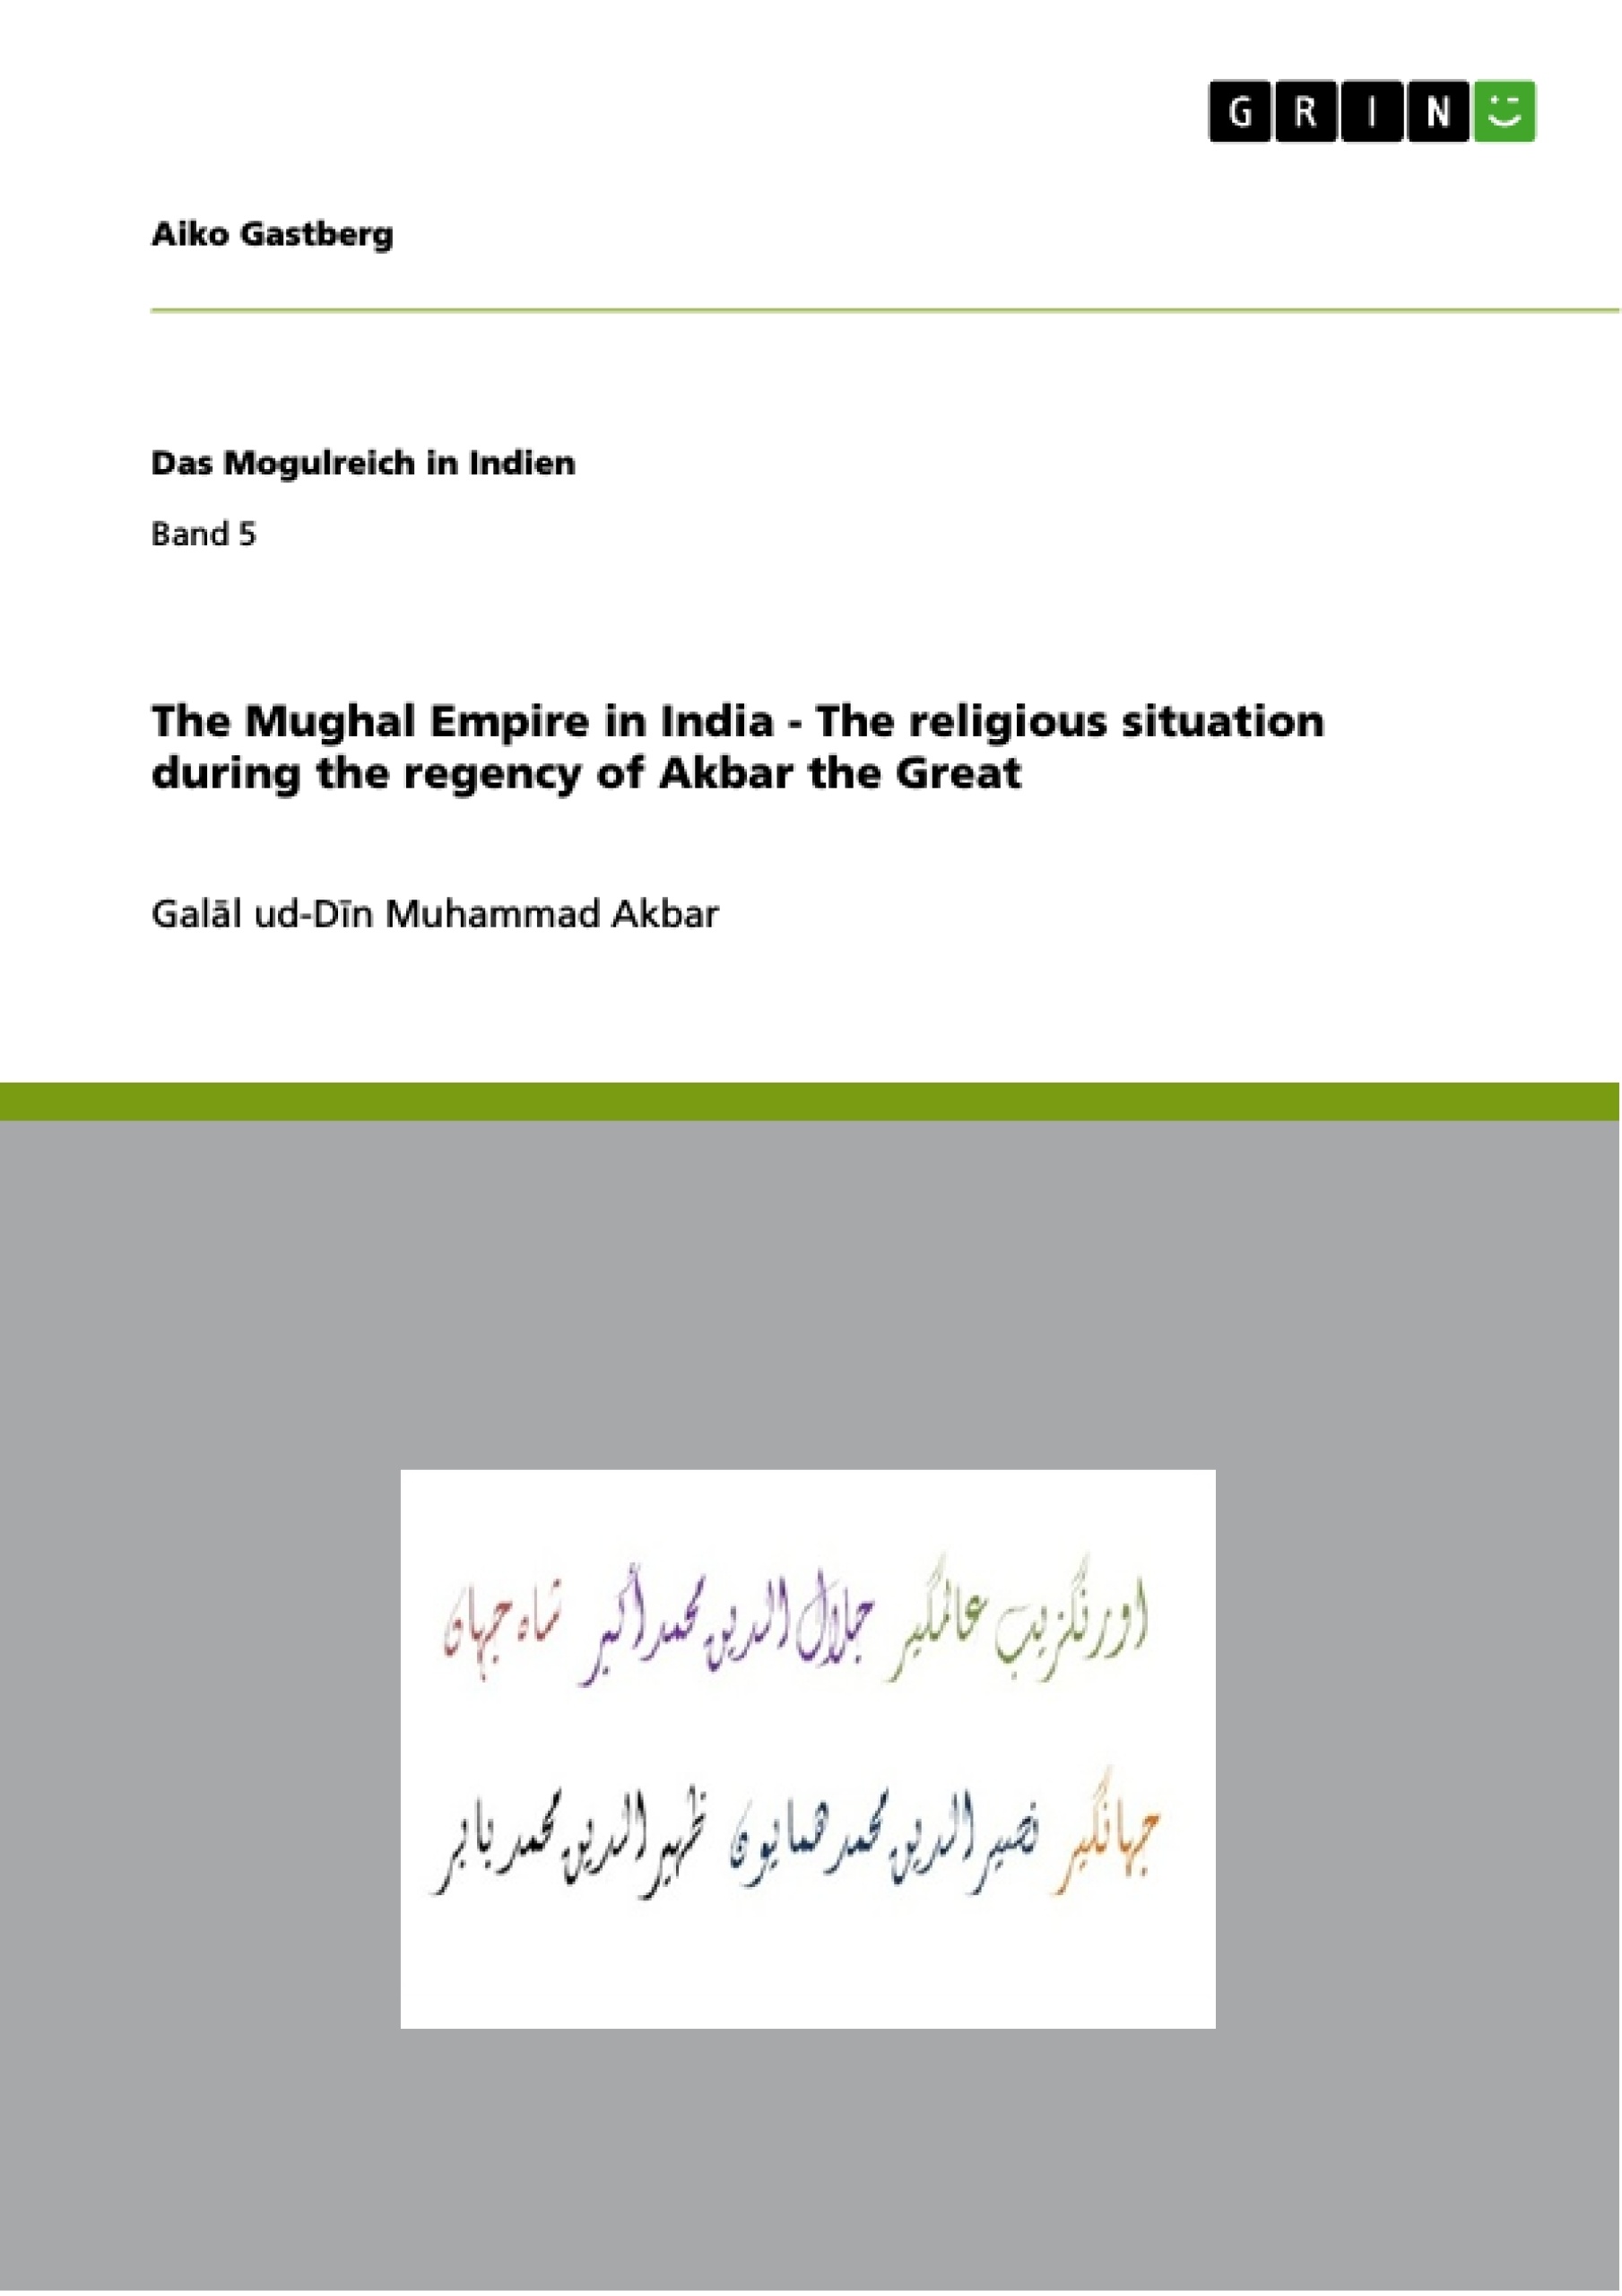 Titel: The Mughal Empire in India - The religious situation during the regency of Akbar the Great